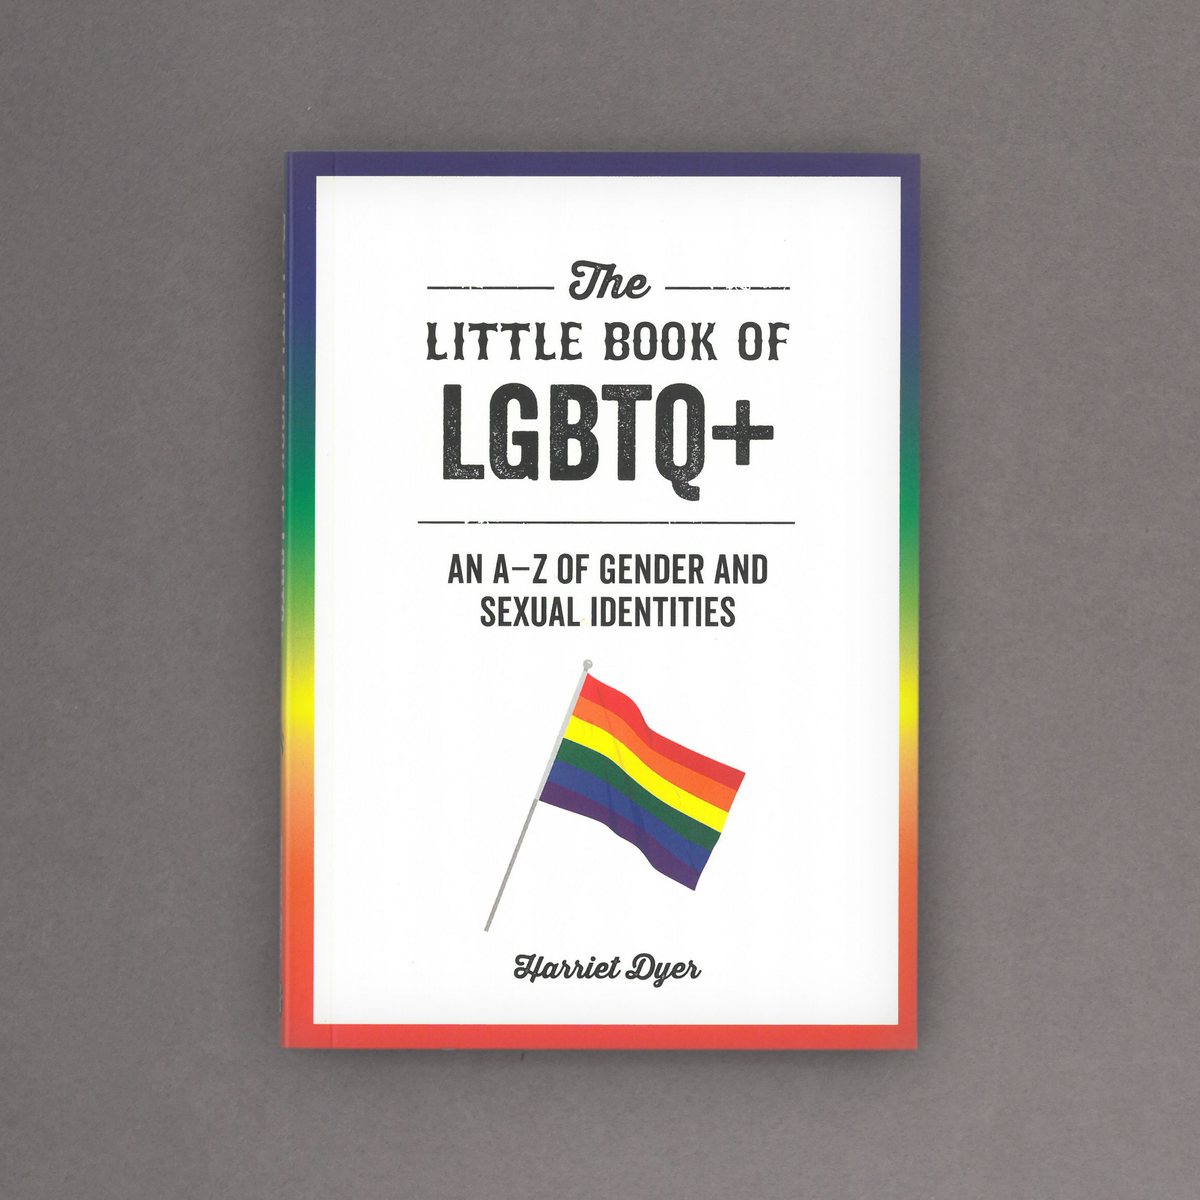 The Little Book of LGBTQ